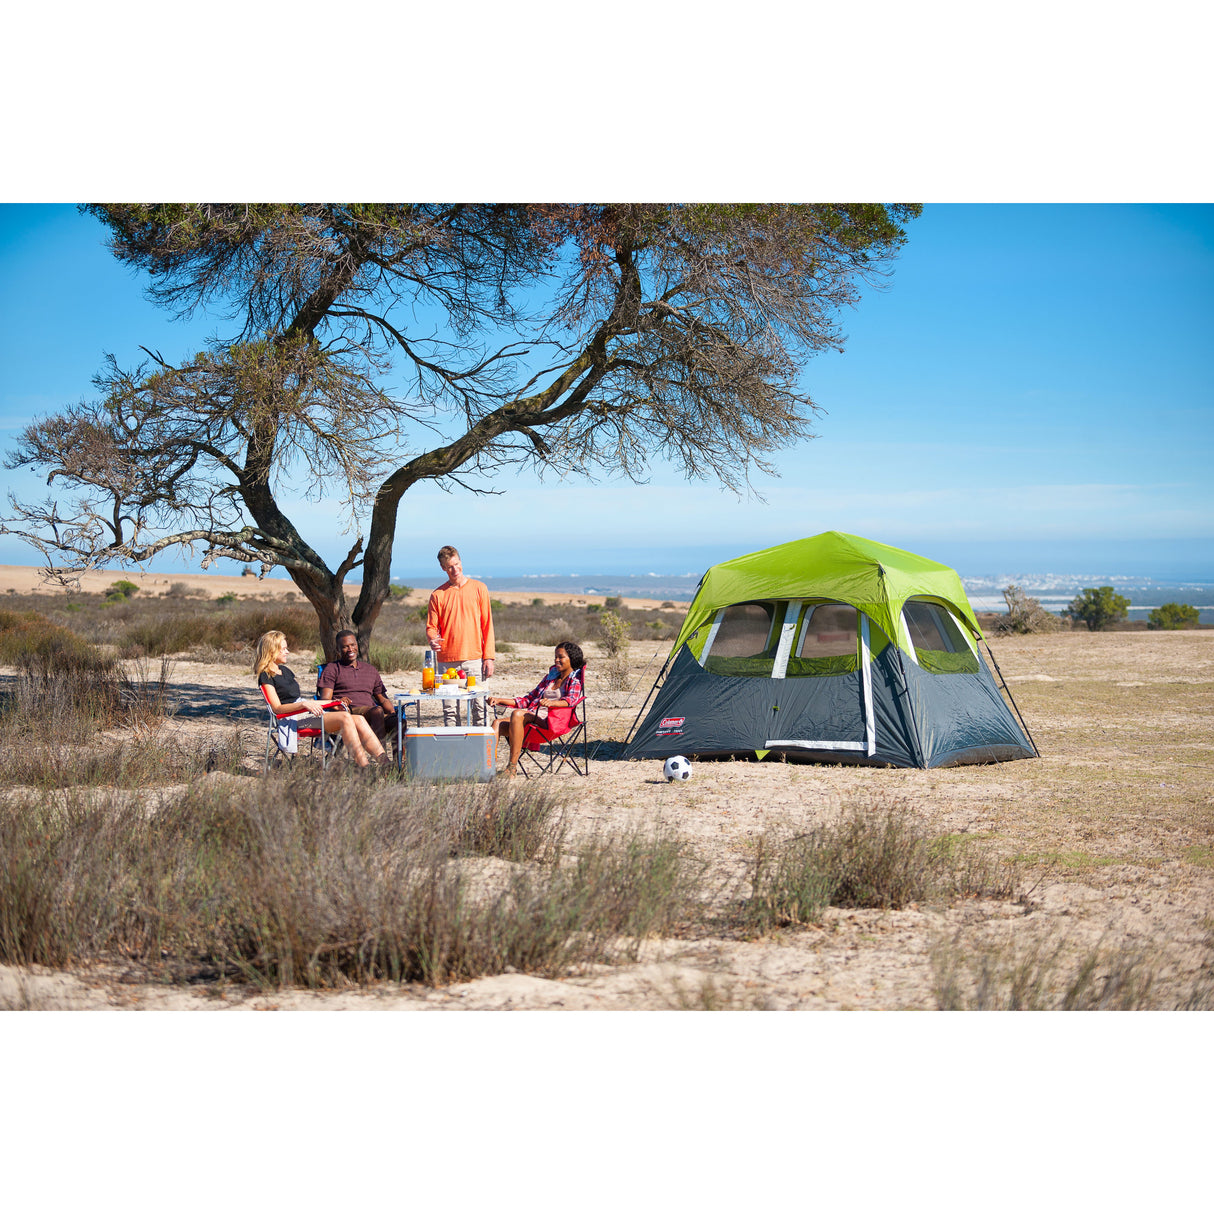 Instant Tent 4 Person